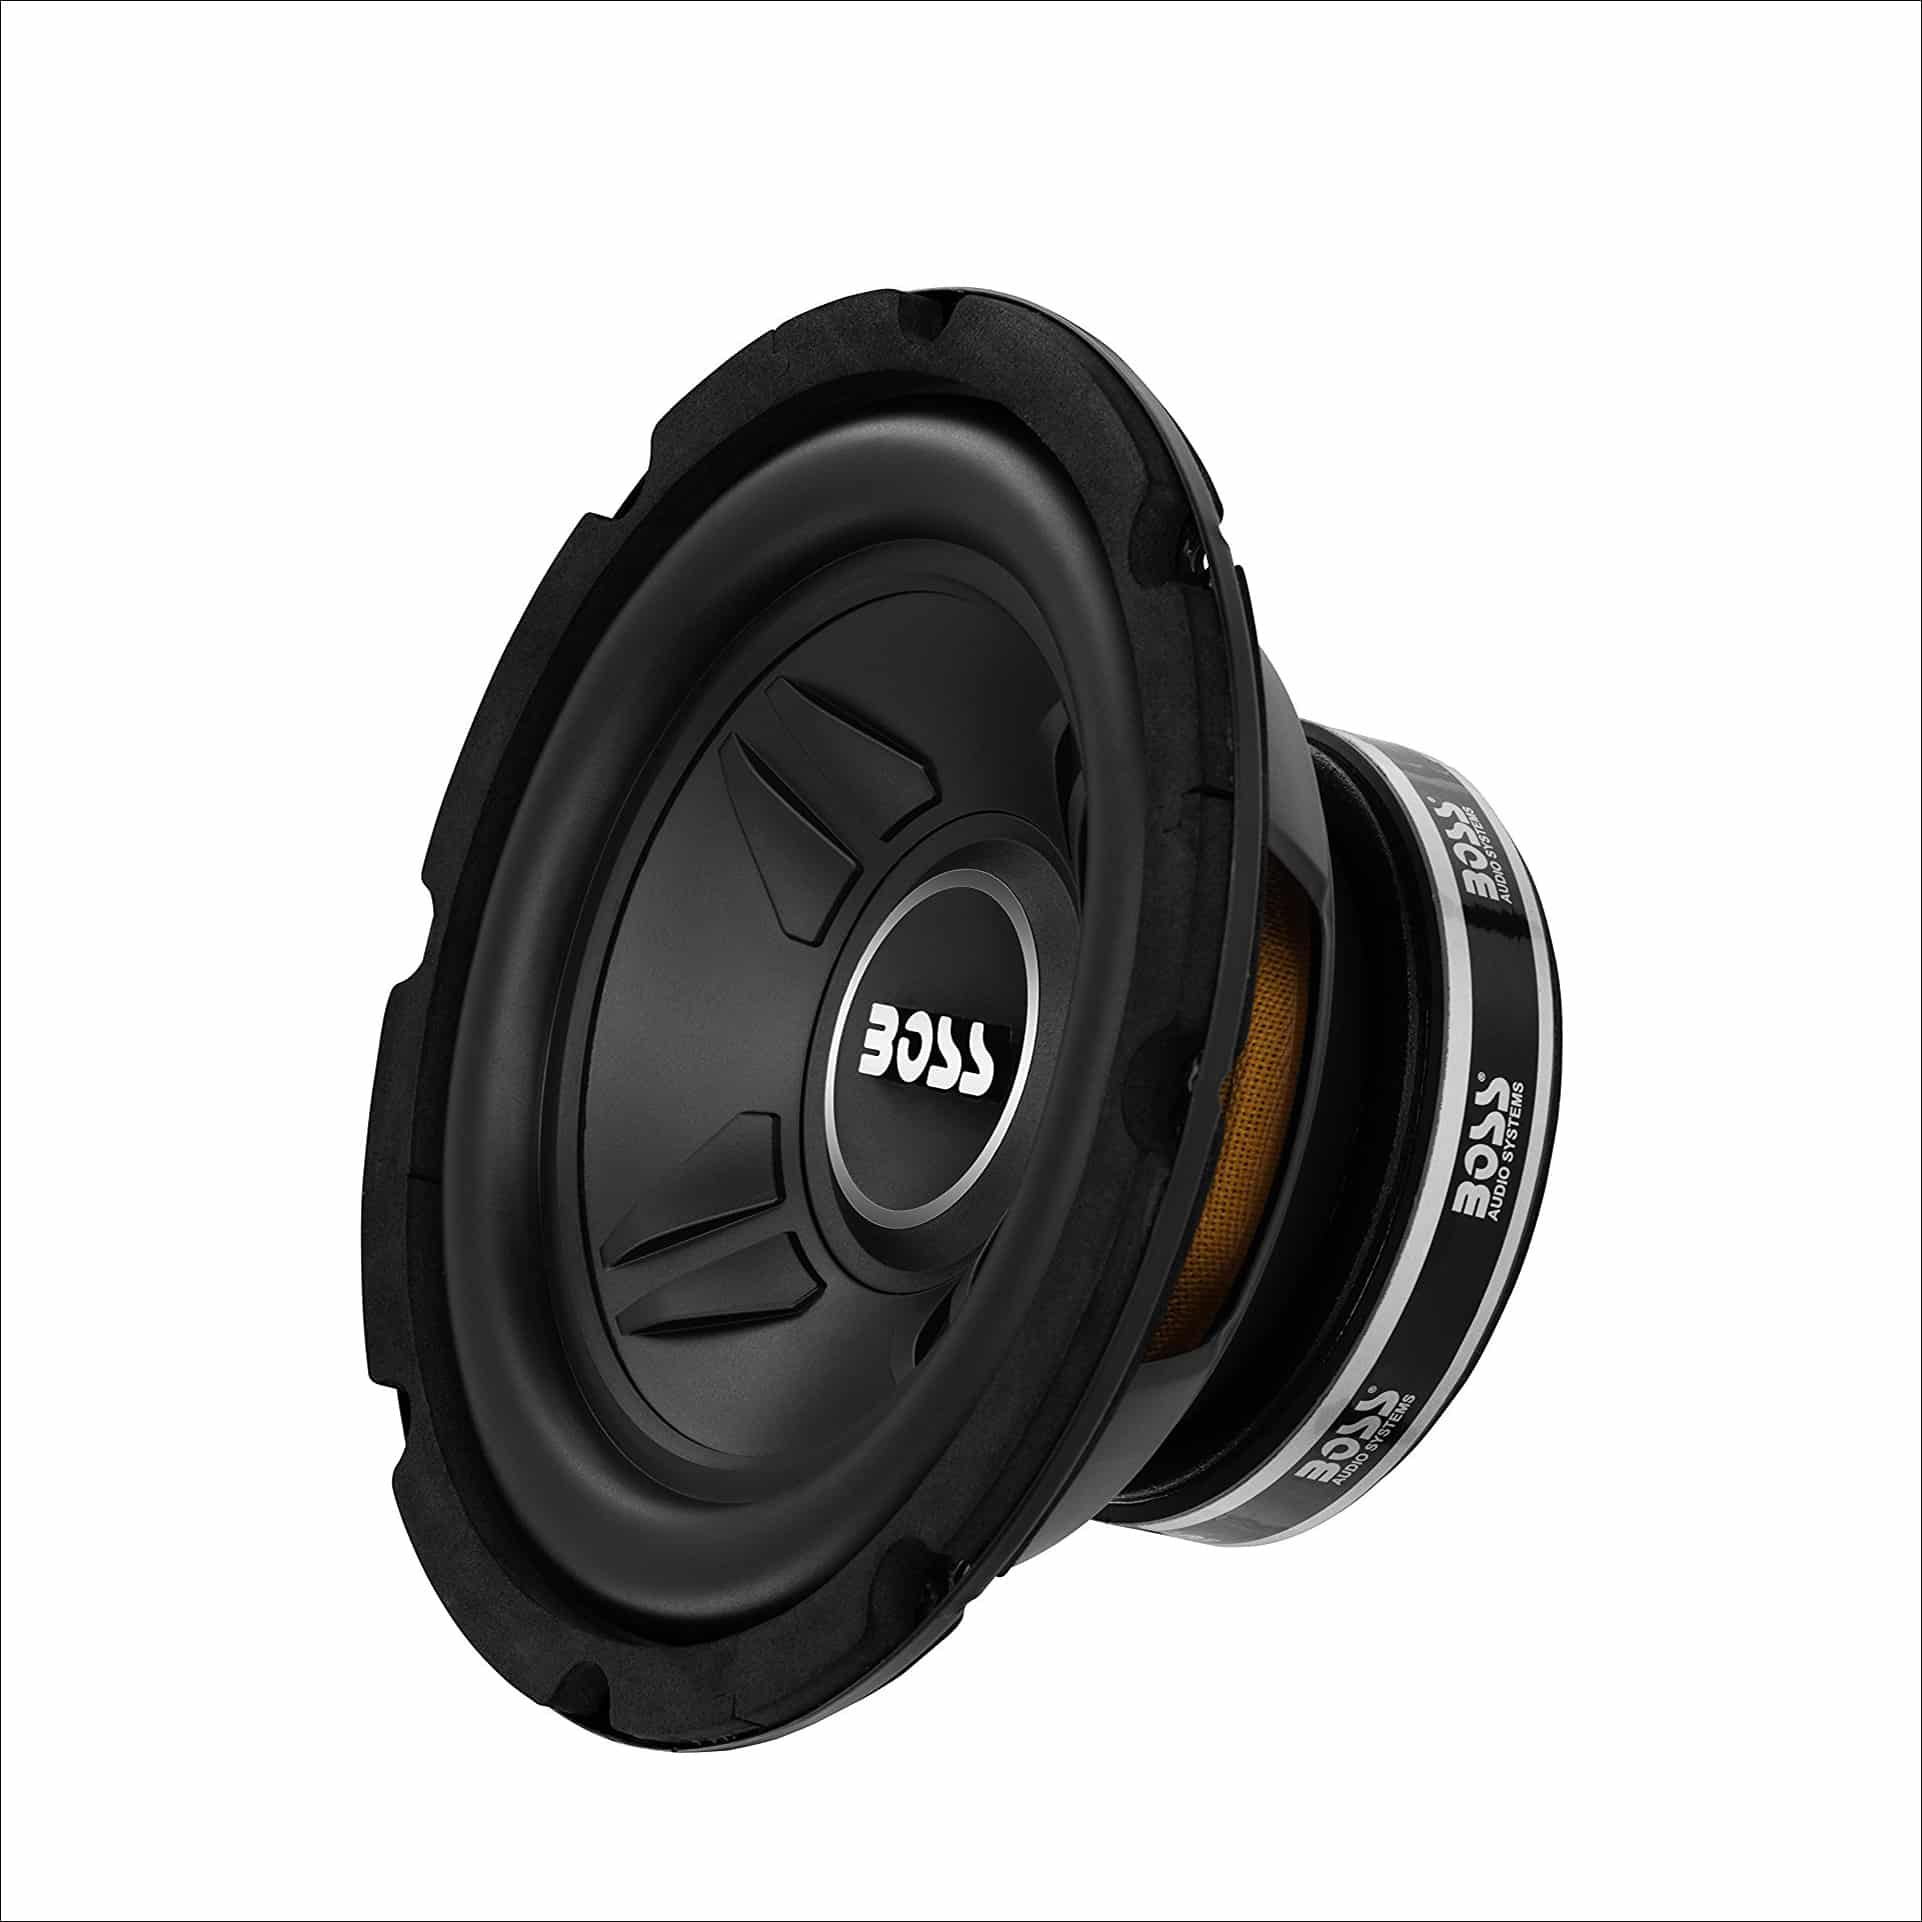 Top 10 Best Car Subwoofers in 2023 - Top Best Product Reviews